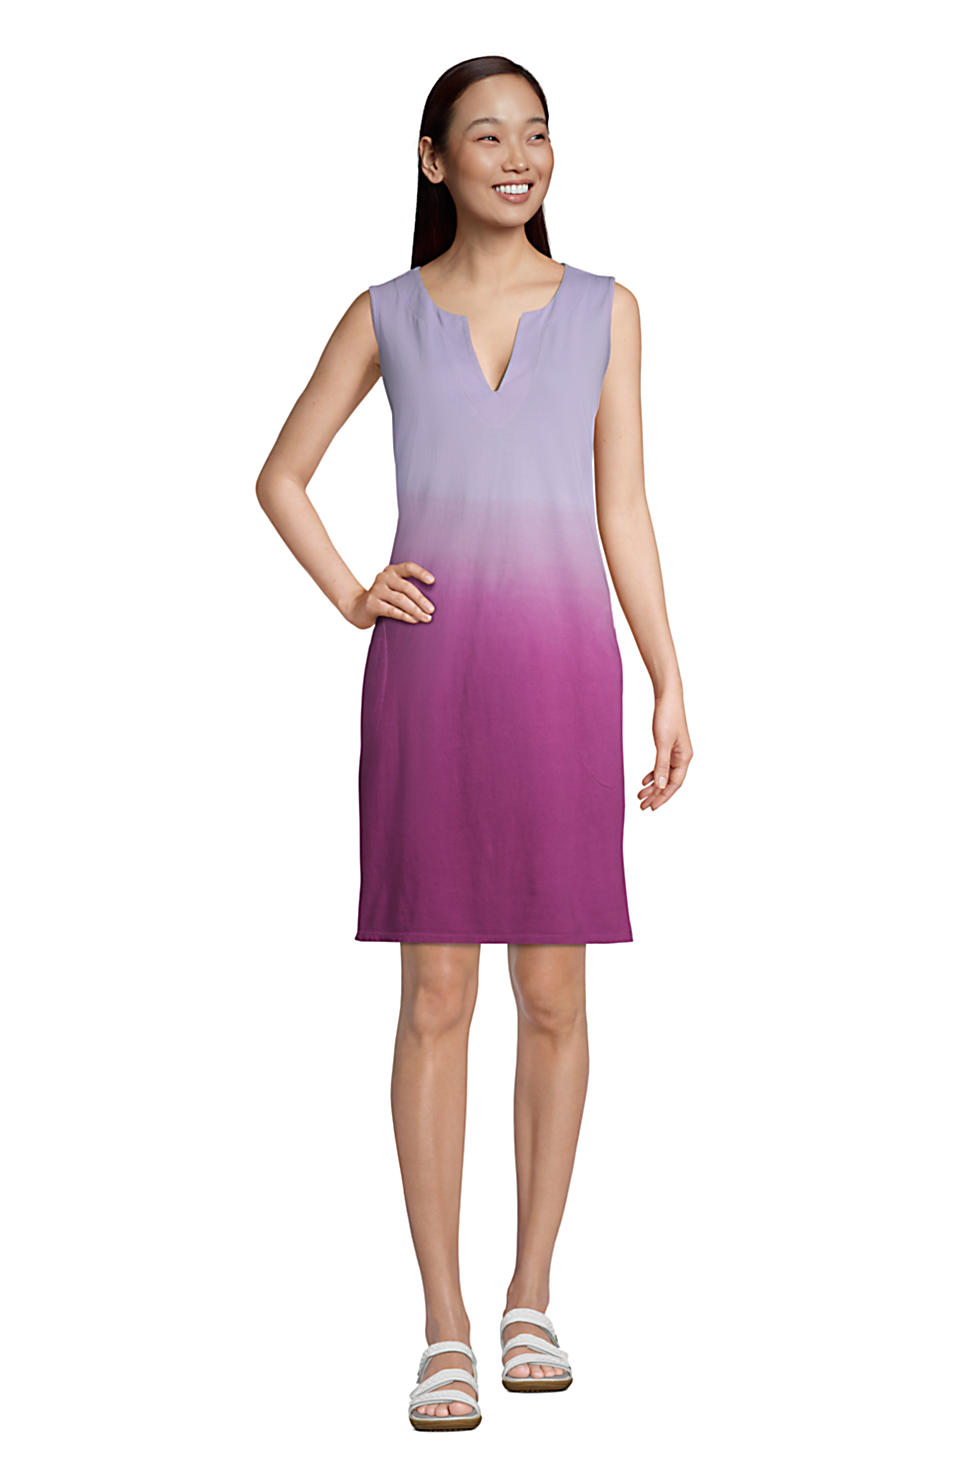 Lands End Women's Cotton Jersey Sleeveless Swim Cover-up Dress (Violet Rose Ombre)